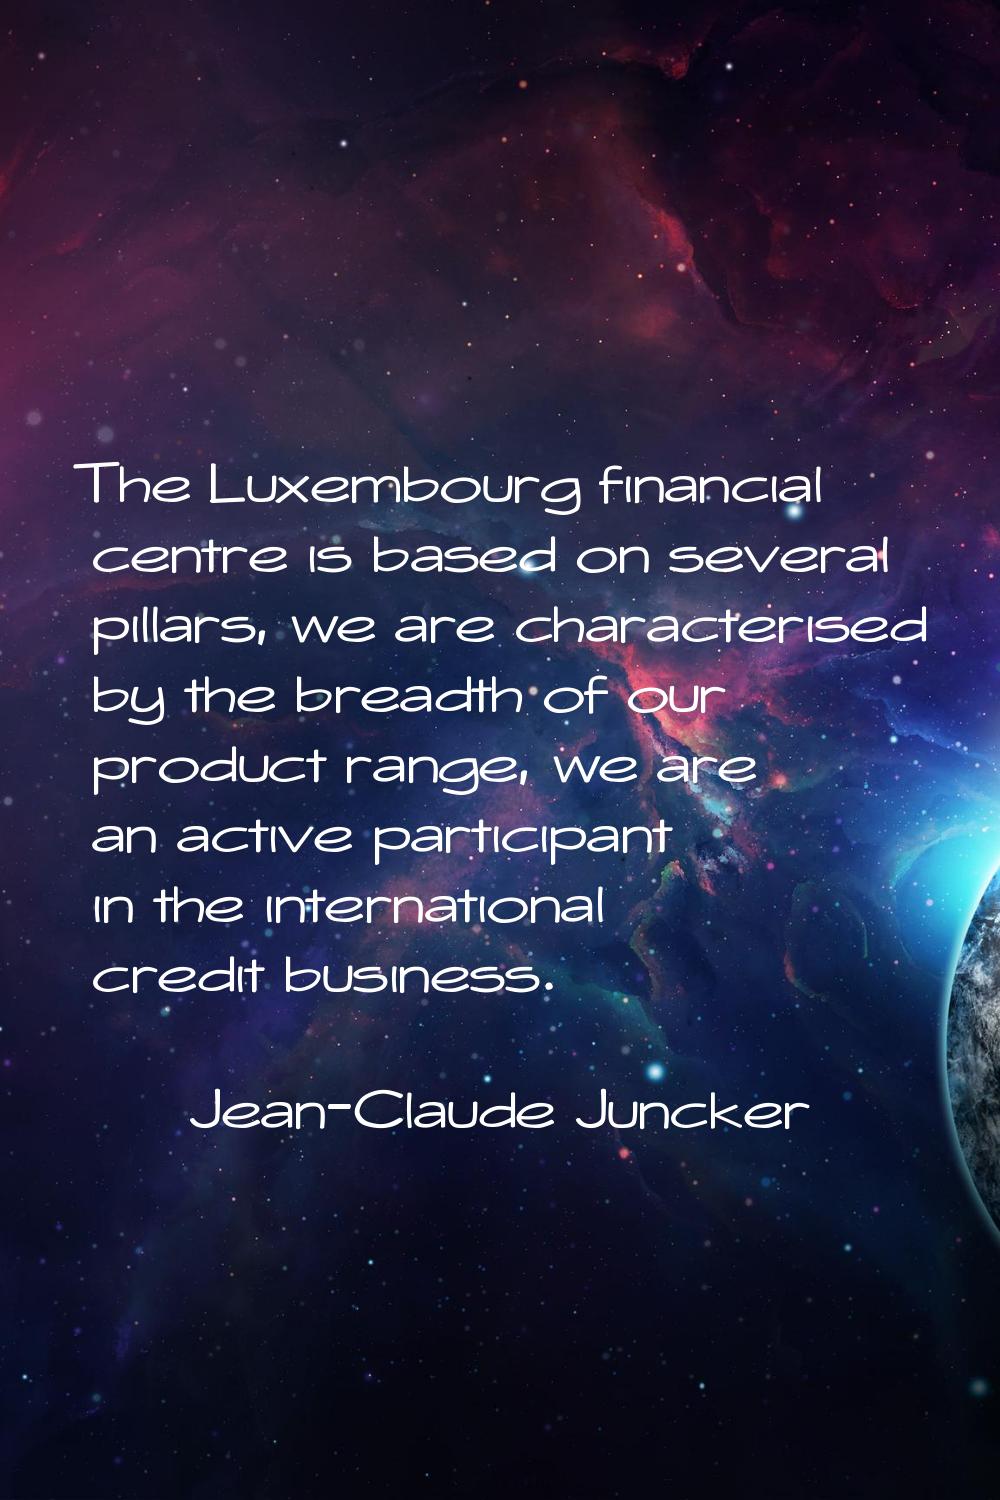 The Luxembourg financial centre is based on several pillars, we are characterised by the breadth of